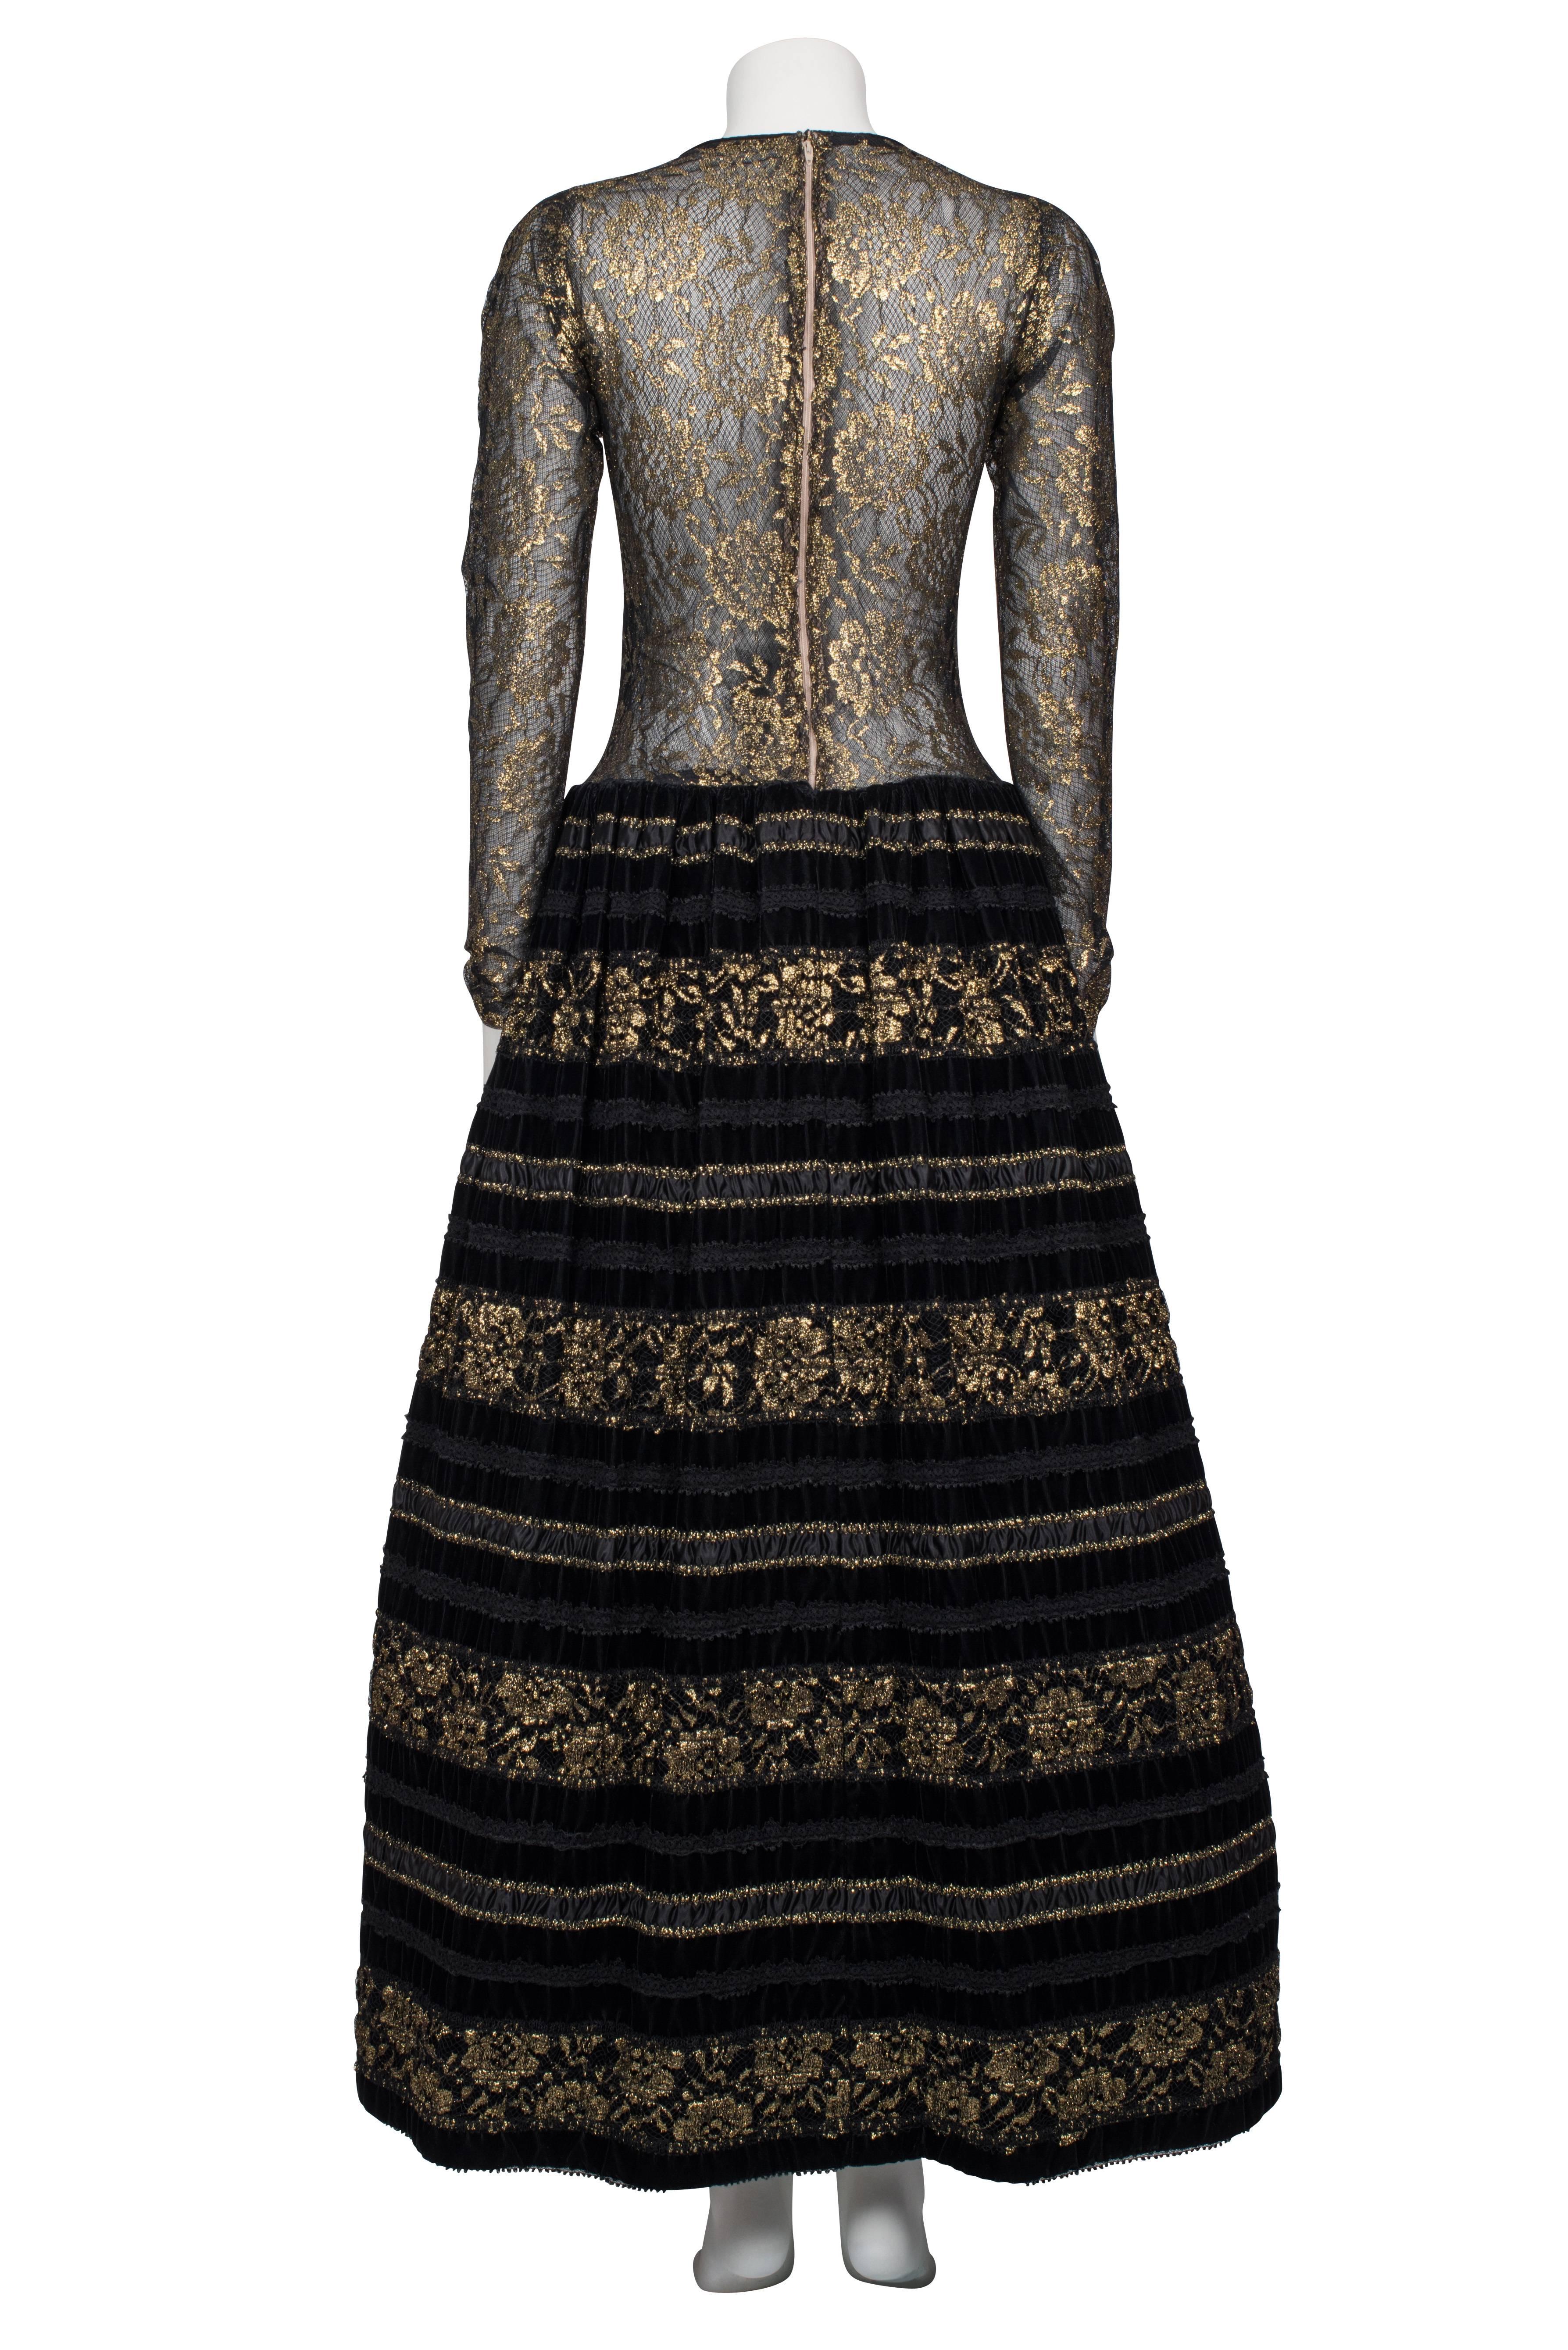 1960's Arnold Scaasi Couture Black & Gold Metallic Lace Gown For Sale 2